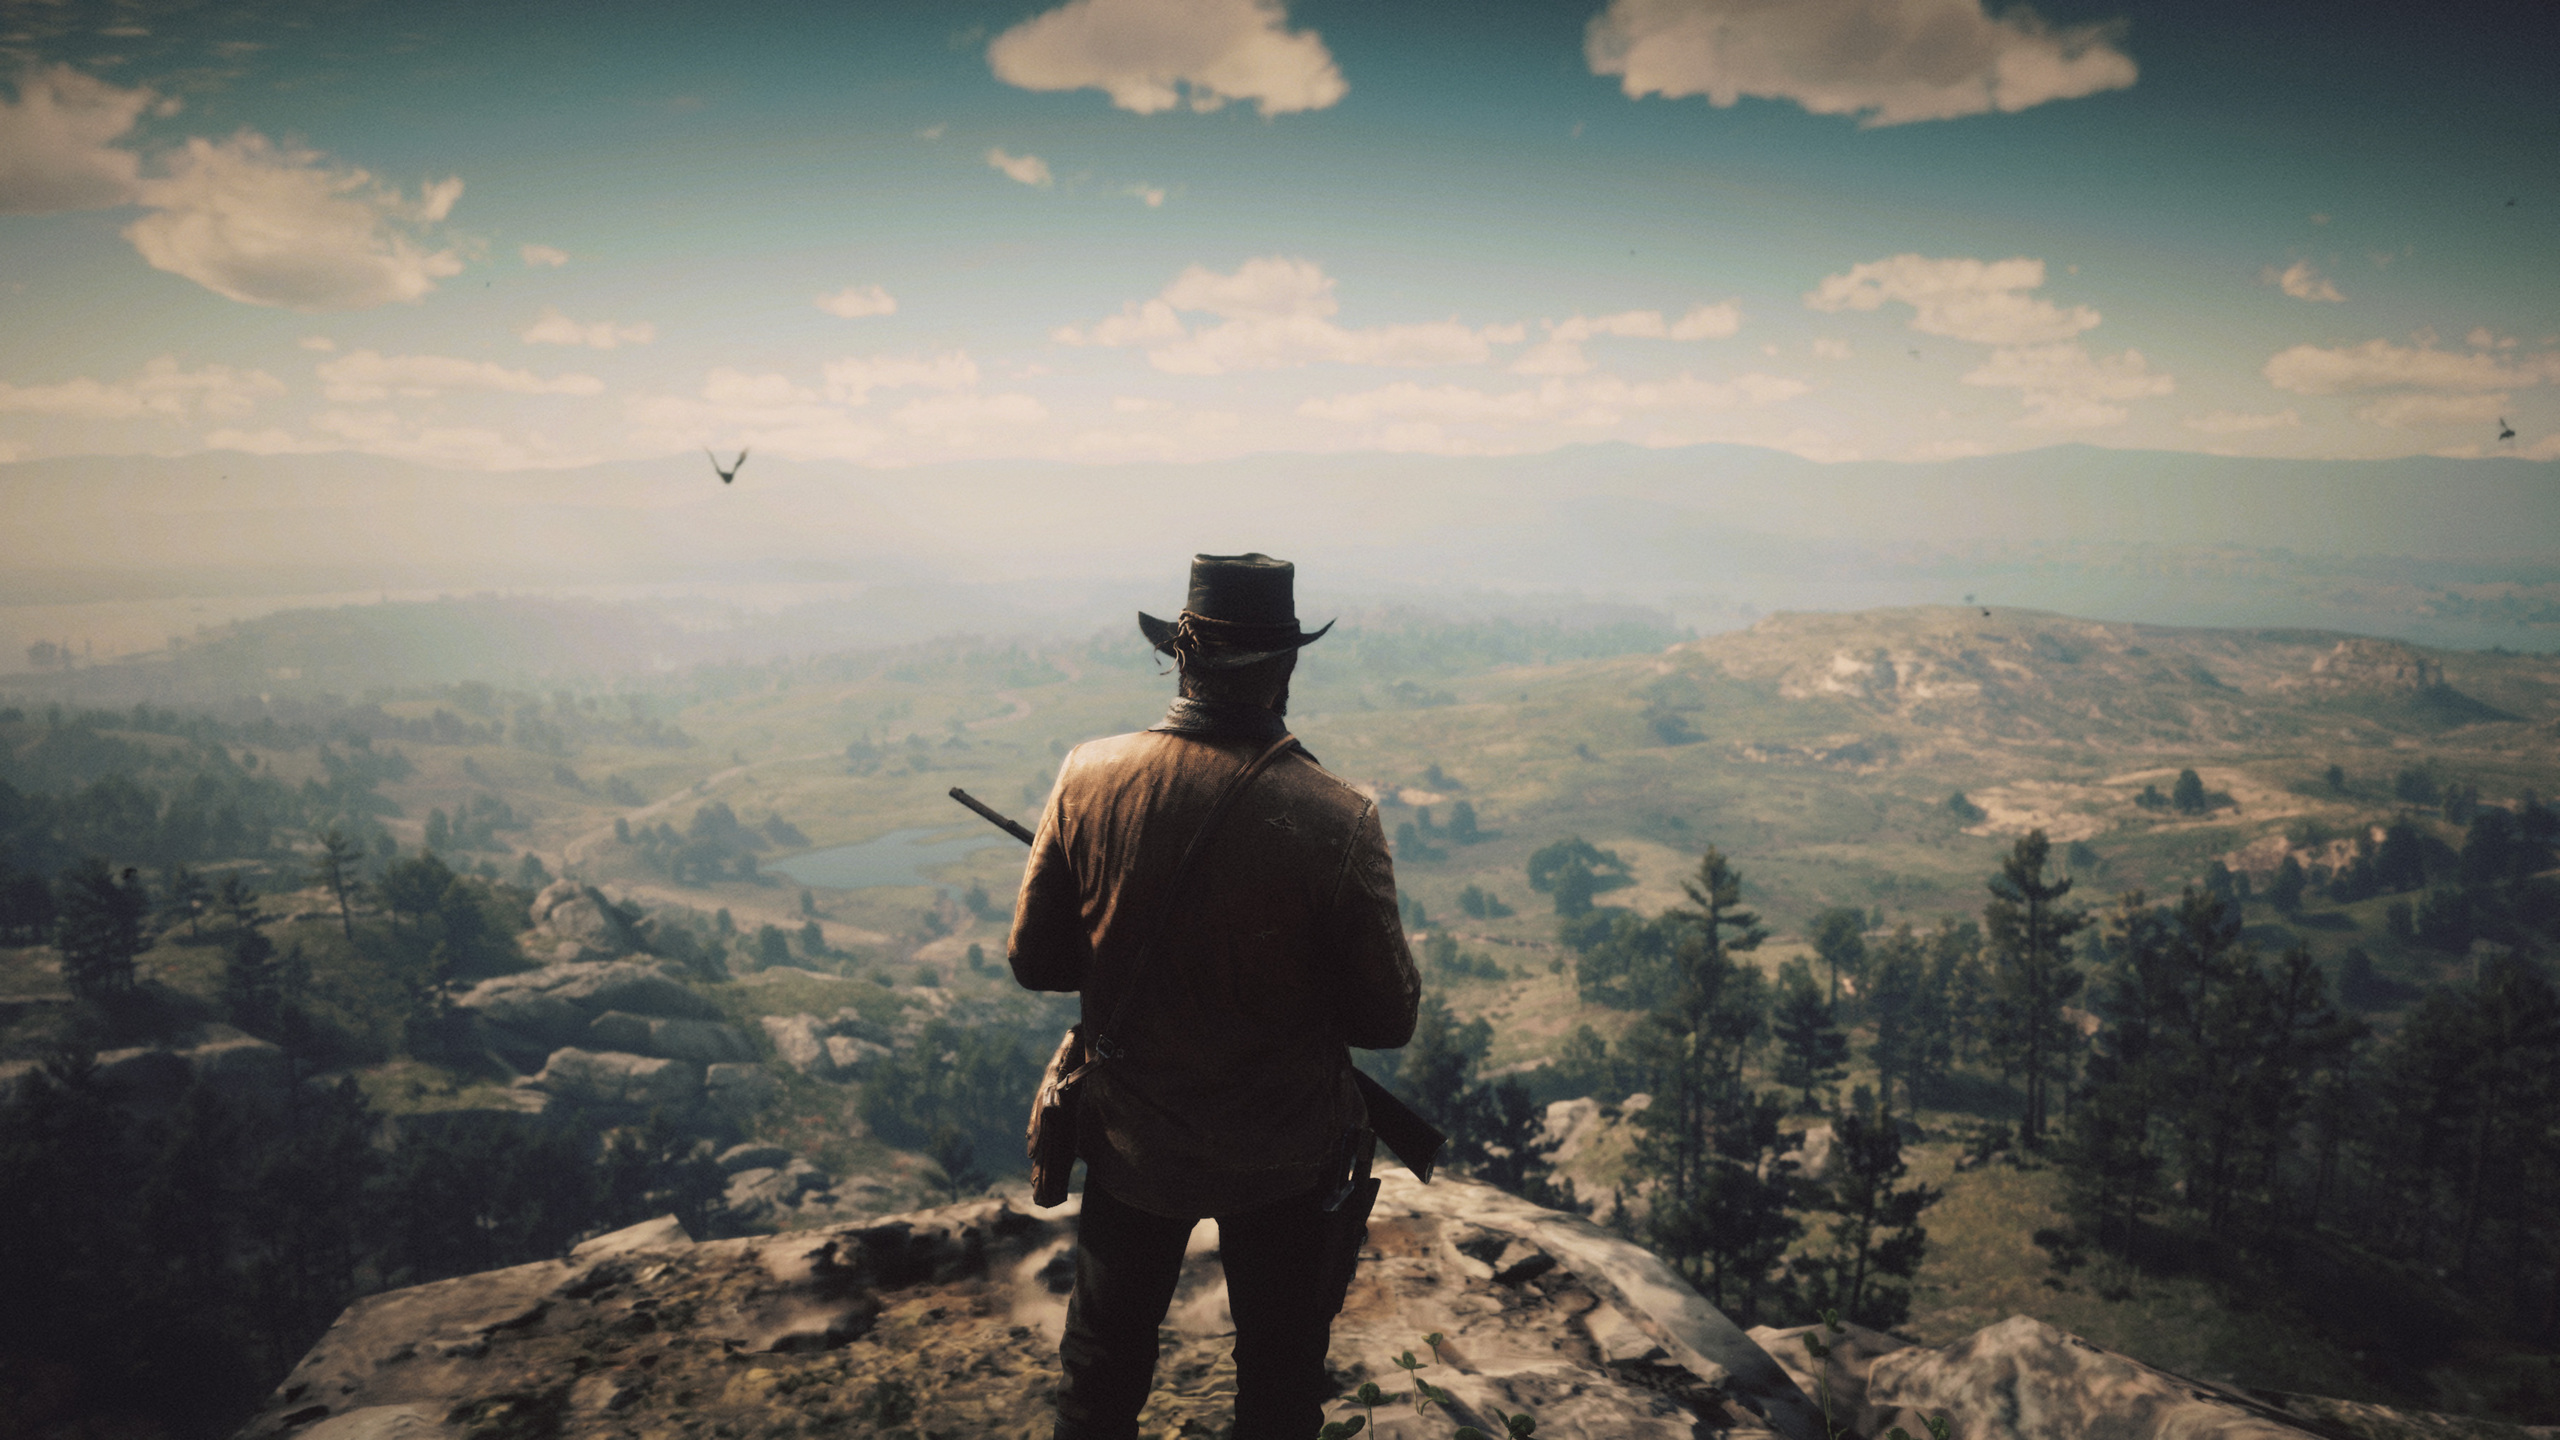 2560x1440 Red Dead Redemp
tion 2 Mission 4k 1440P Resolution HD 4k